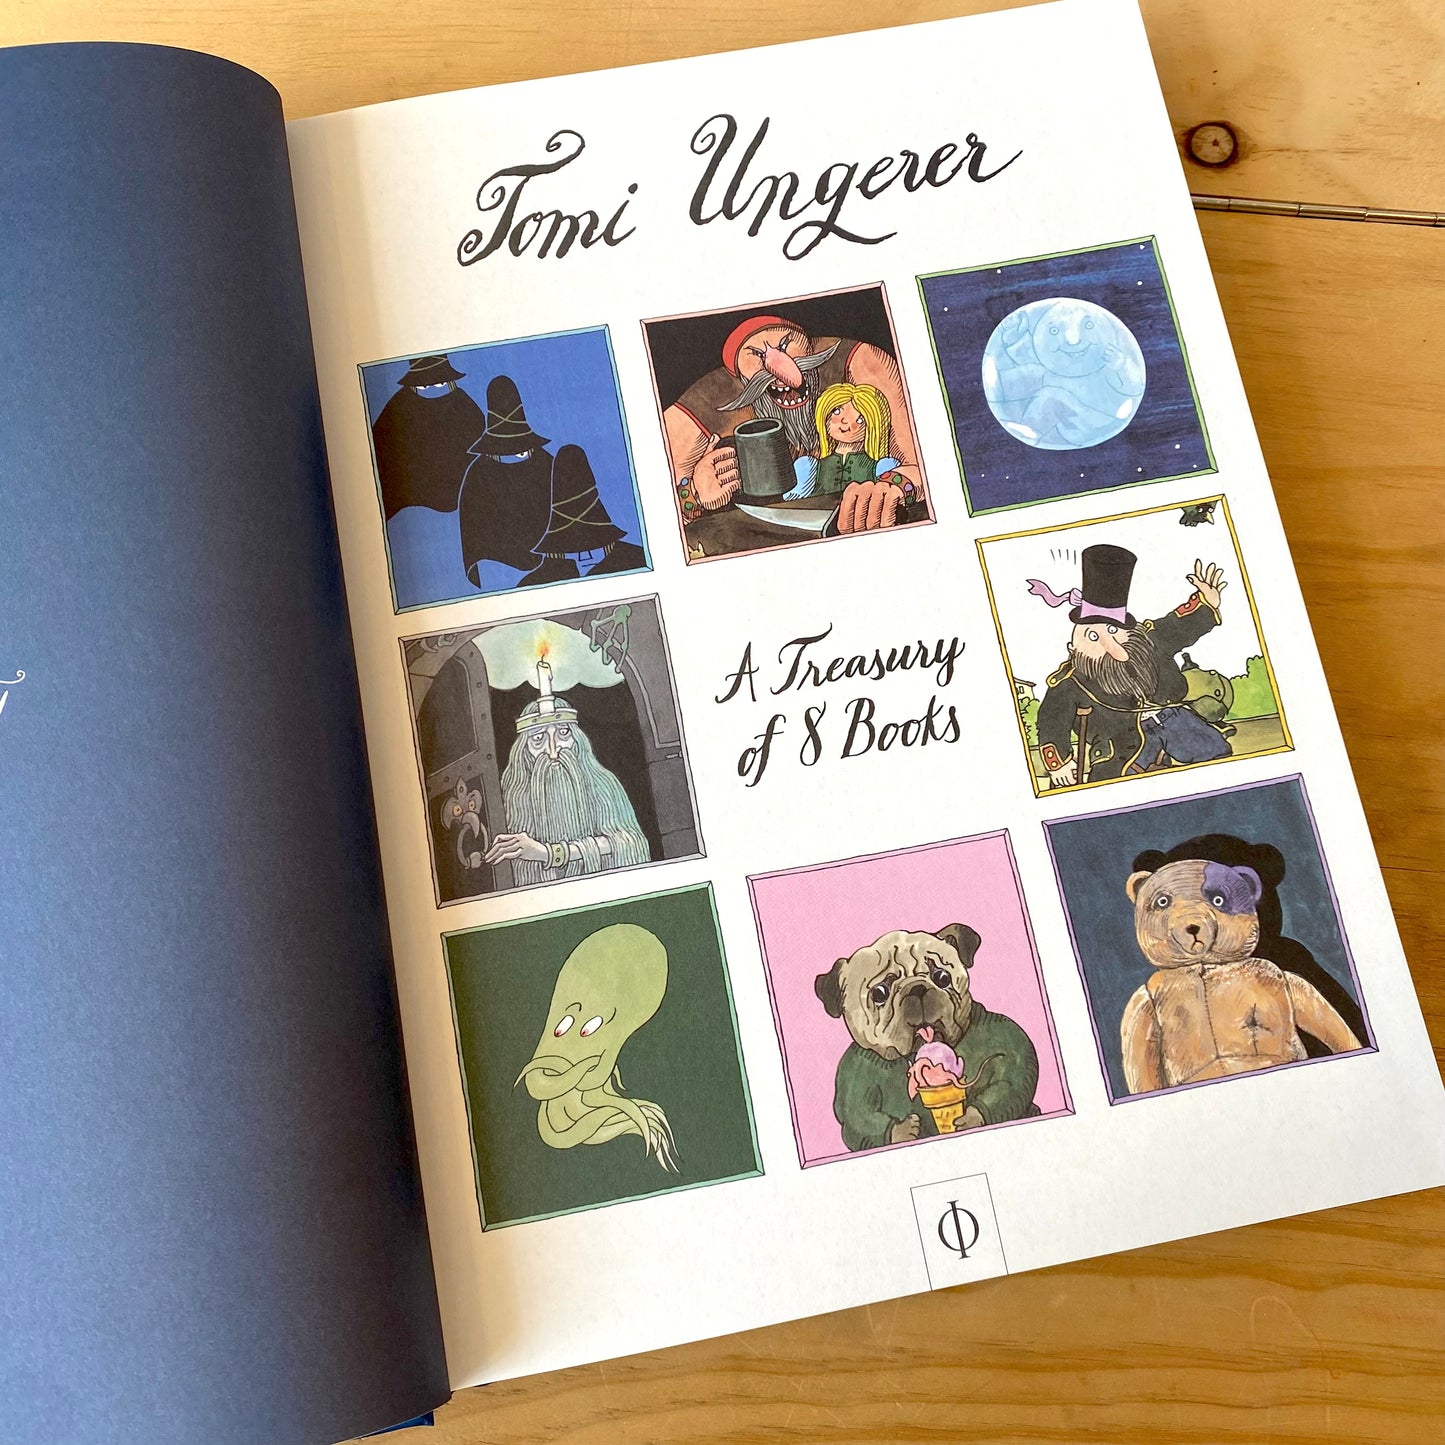 Tomi Ungerer: A Treasury of 8 Books